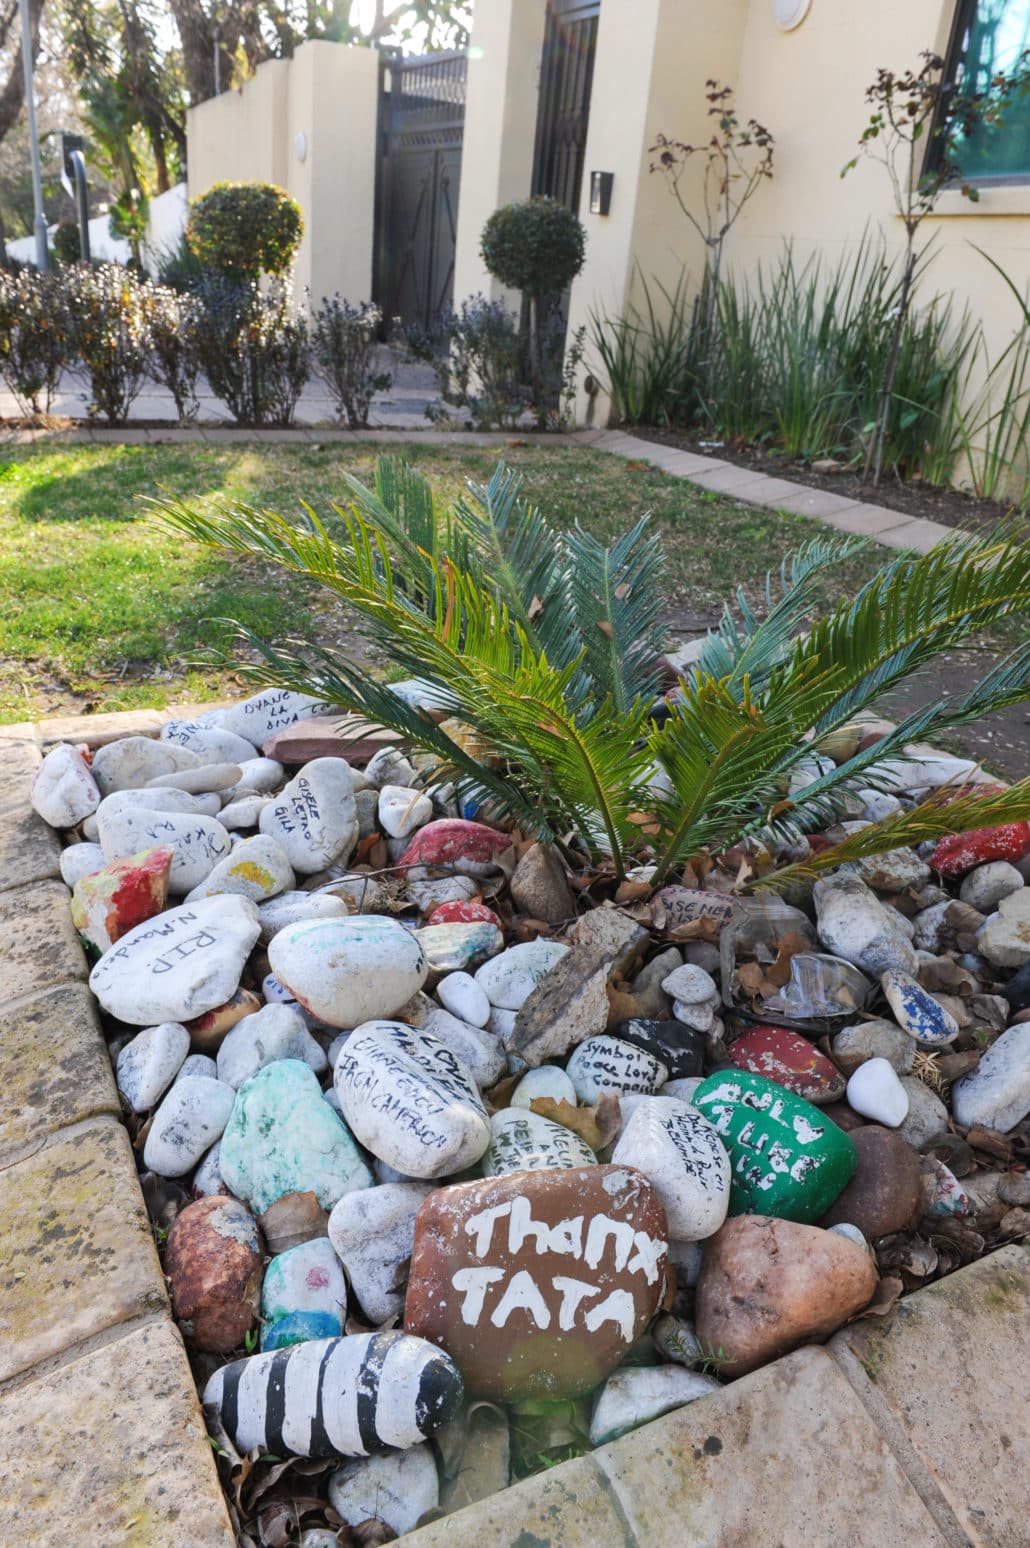 In front of Nelson Mandela's former residence, visitors leave personalized good will messages on stones which are left out front